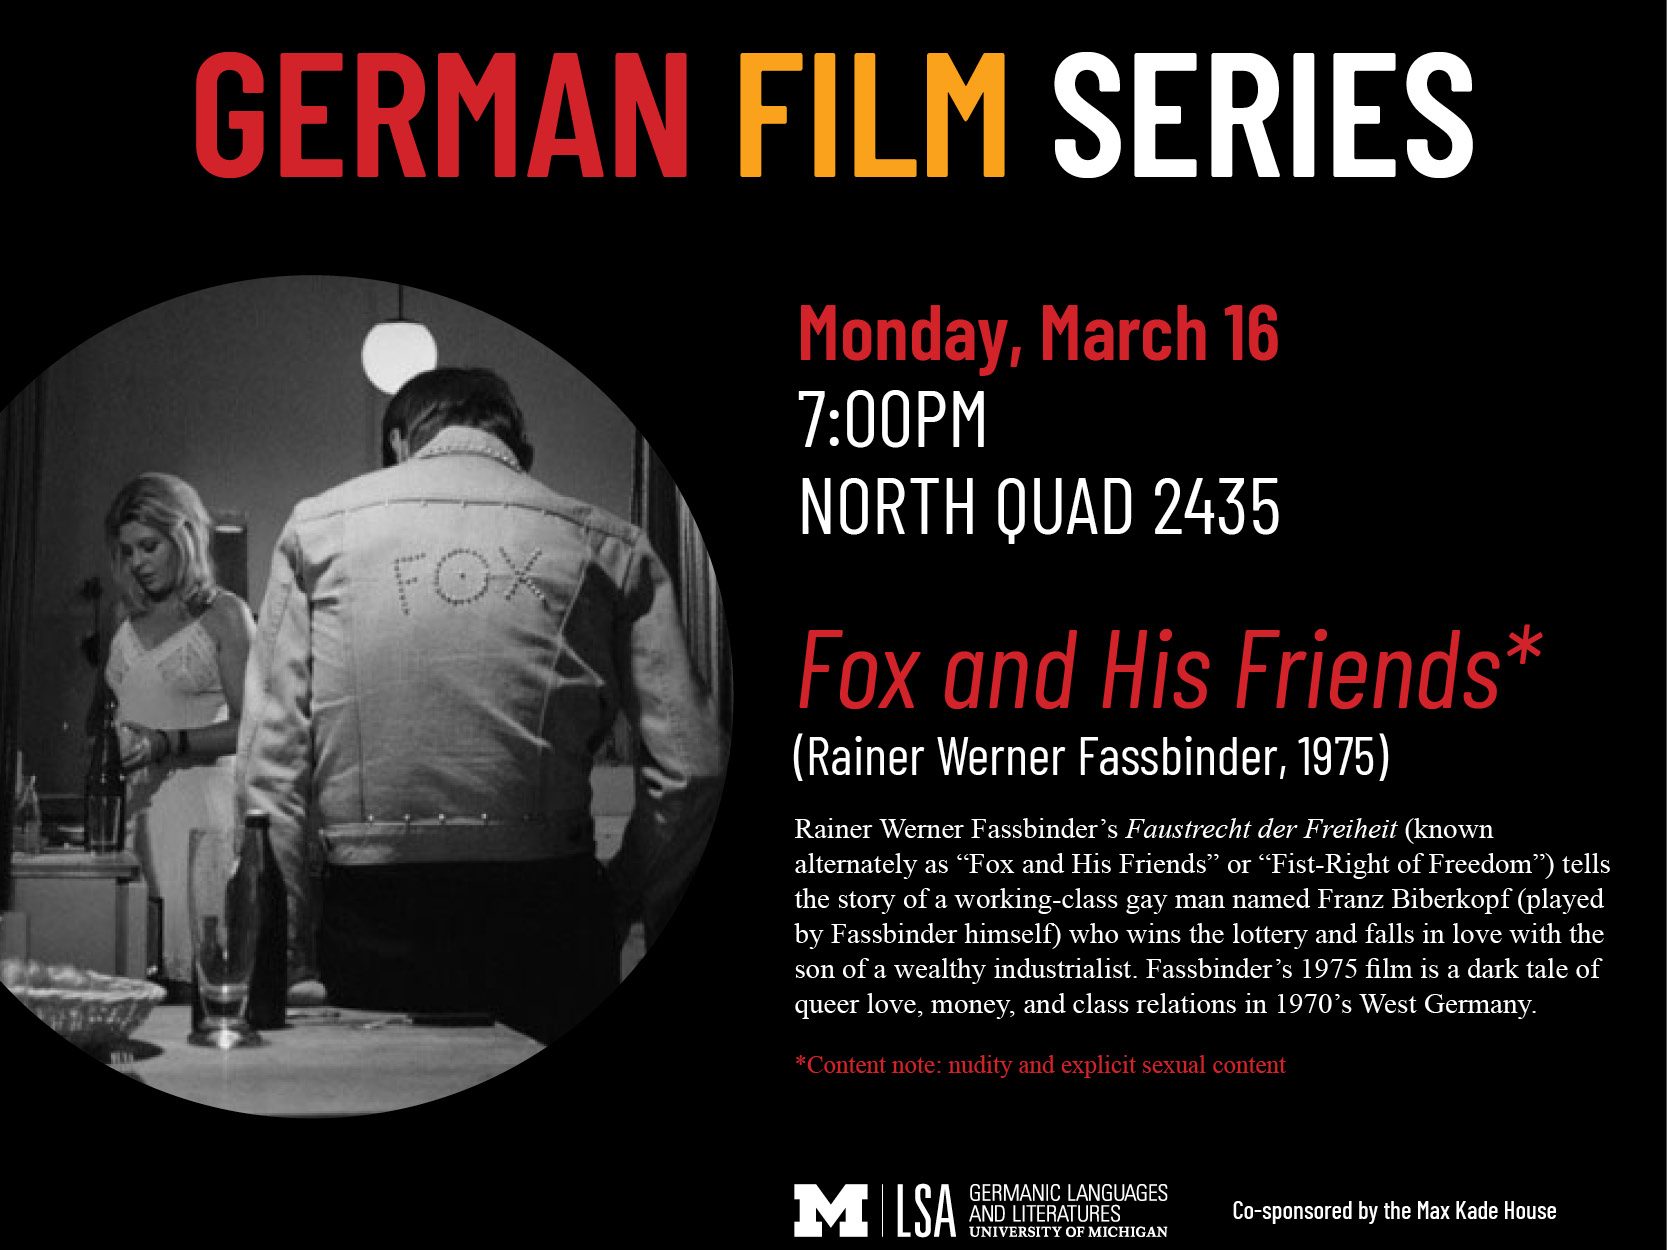 Join us on March 16! U-M LSA Germanic Languages and Literatures photo